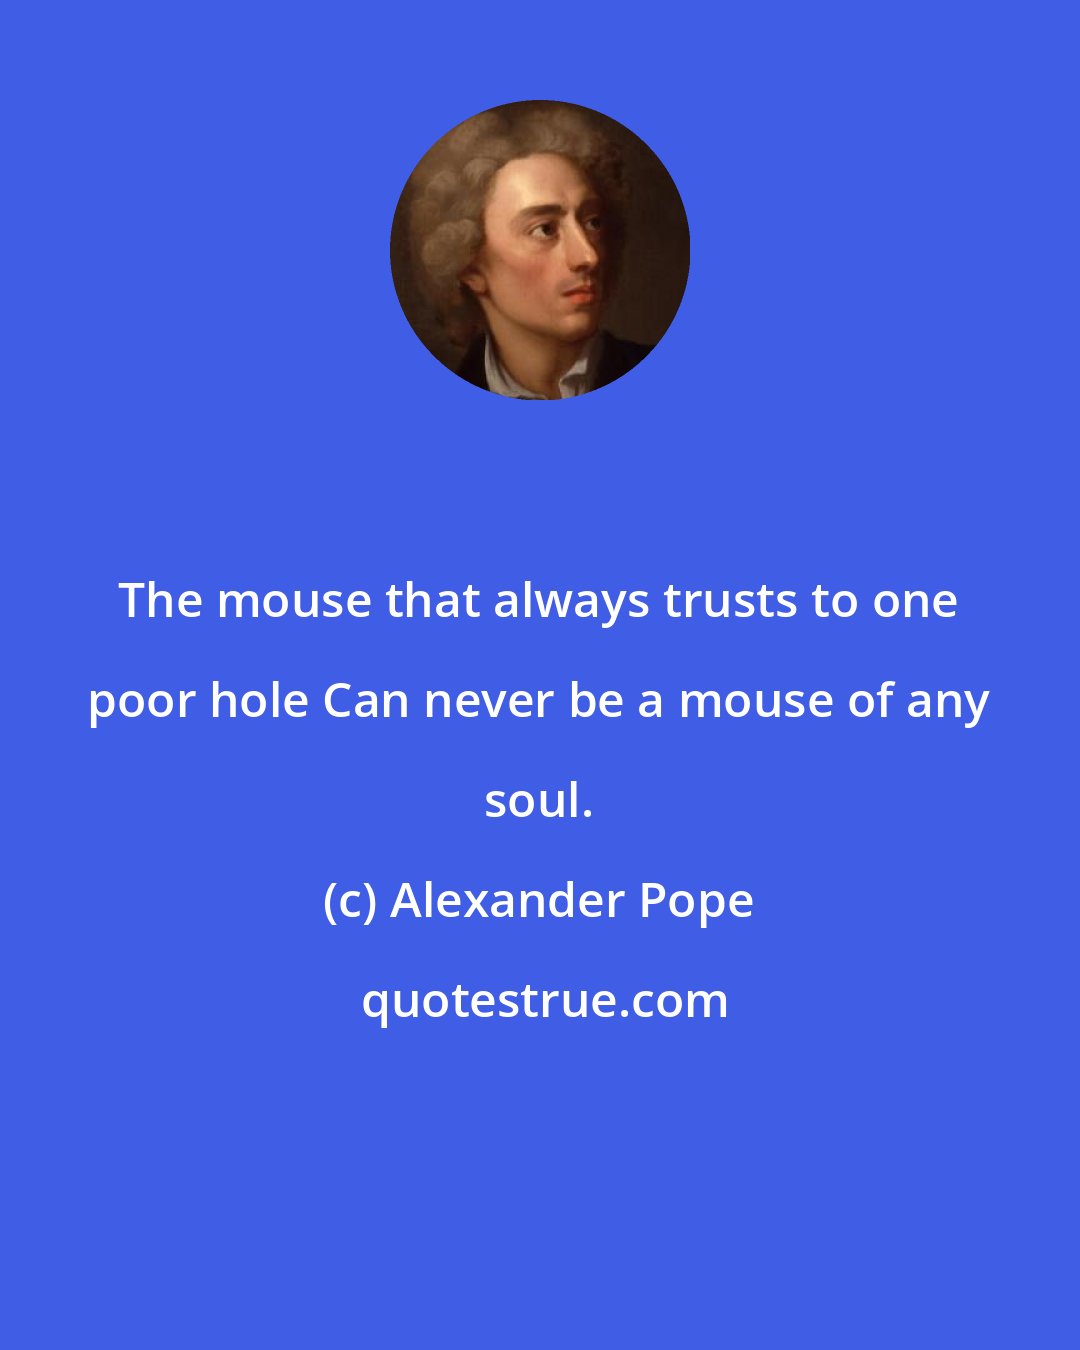 Alexander Pope: The mouse that always trusts to one poor hole Can never be a mouse of any soul.